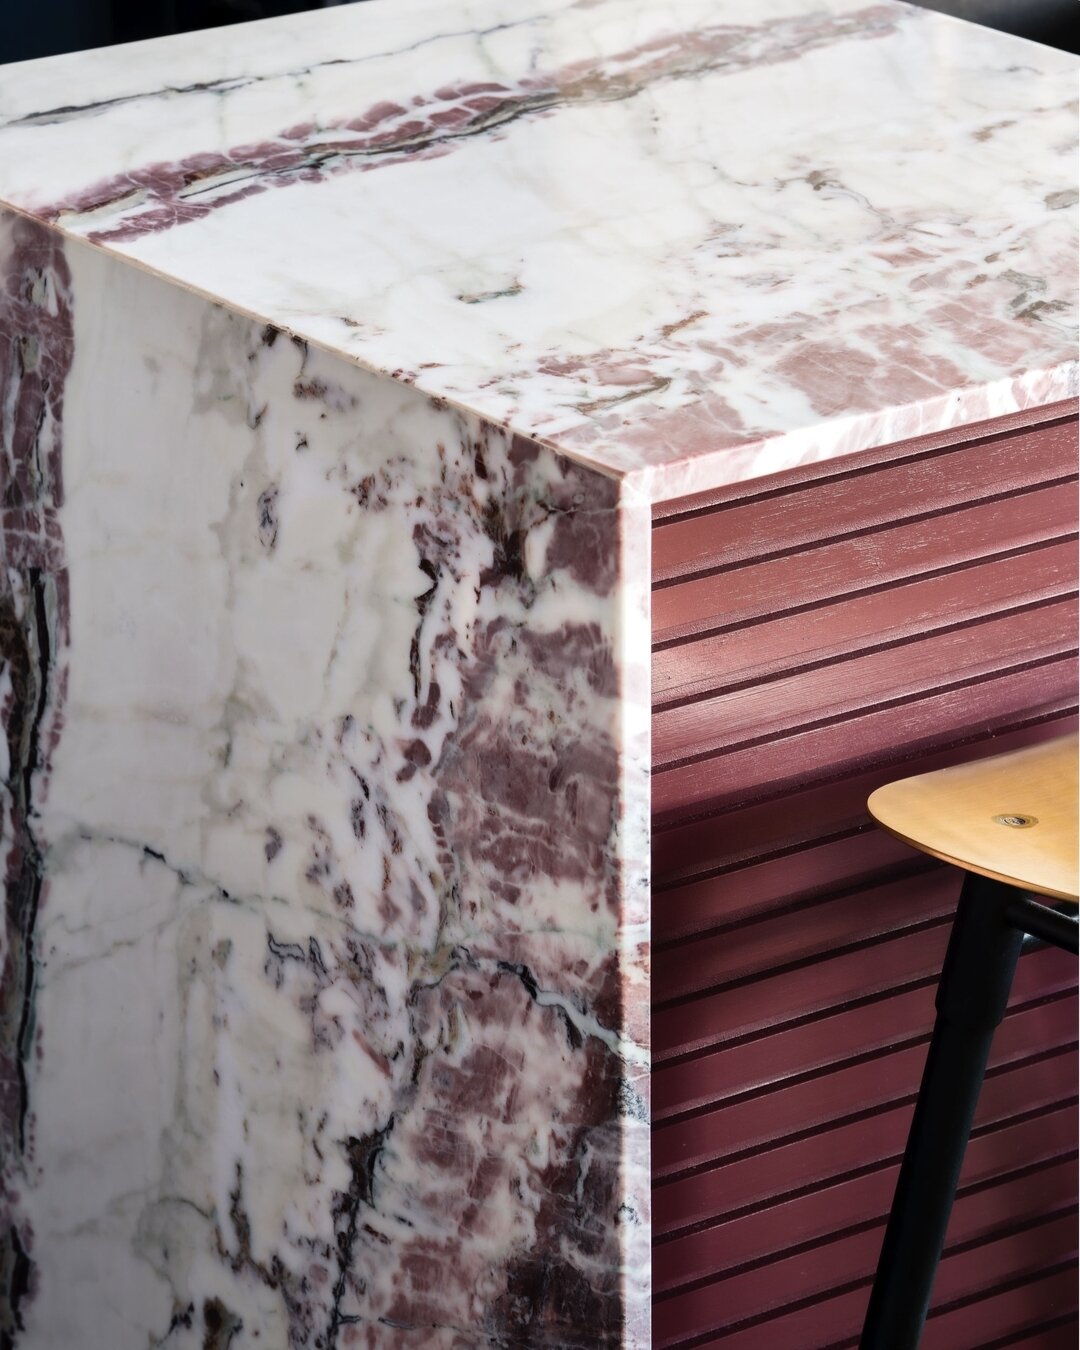 DARLINGHURST APARTMENT - Benchtop details of the incredible Brecia Capria marble.